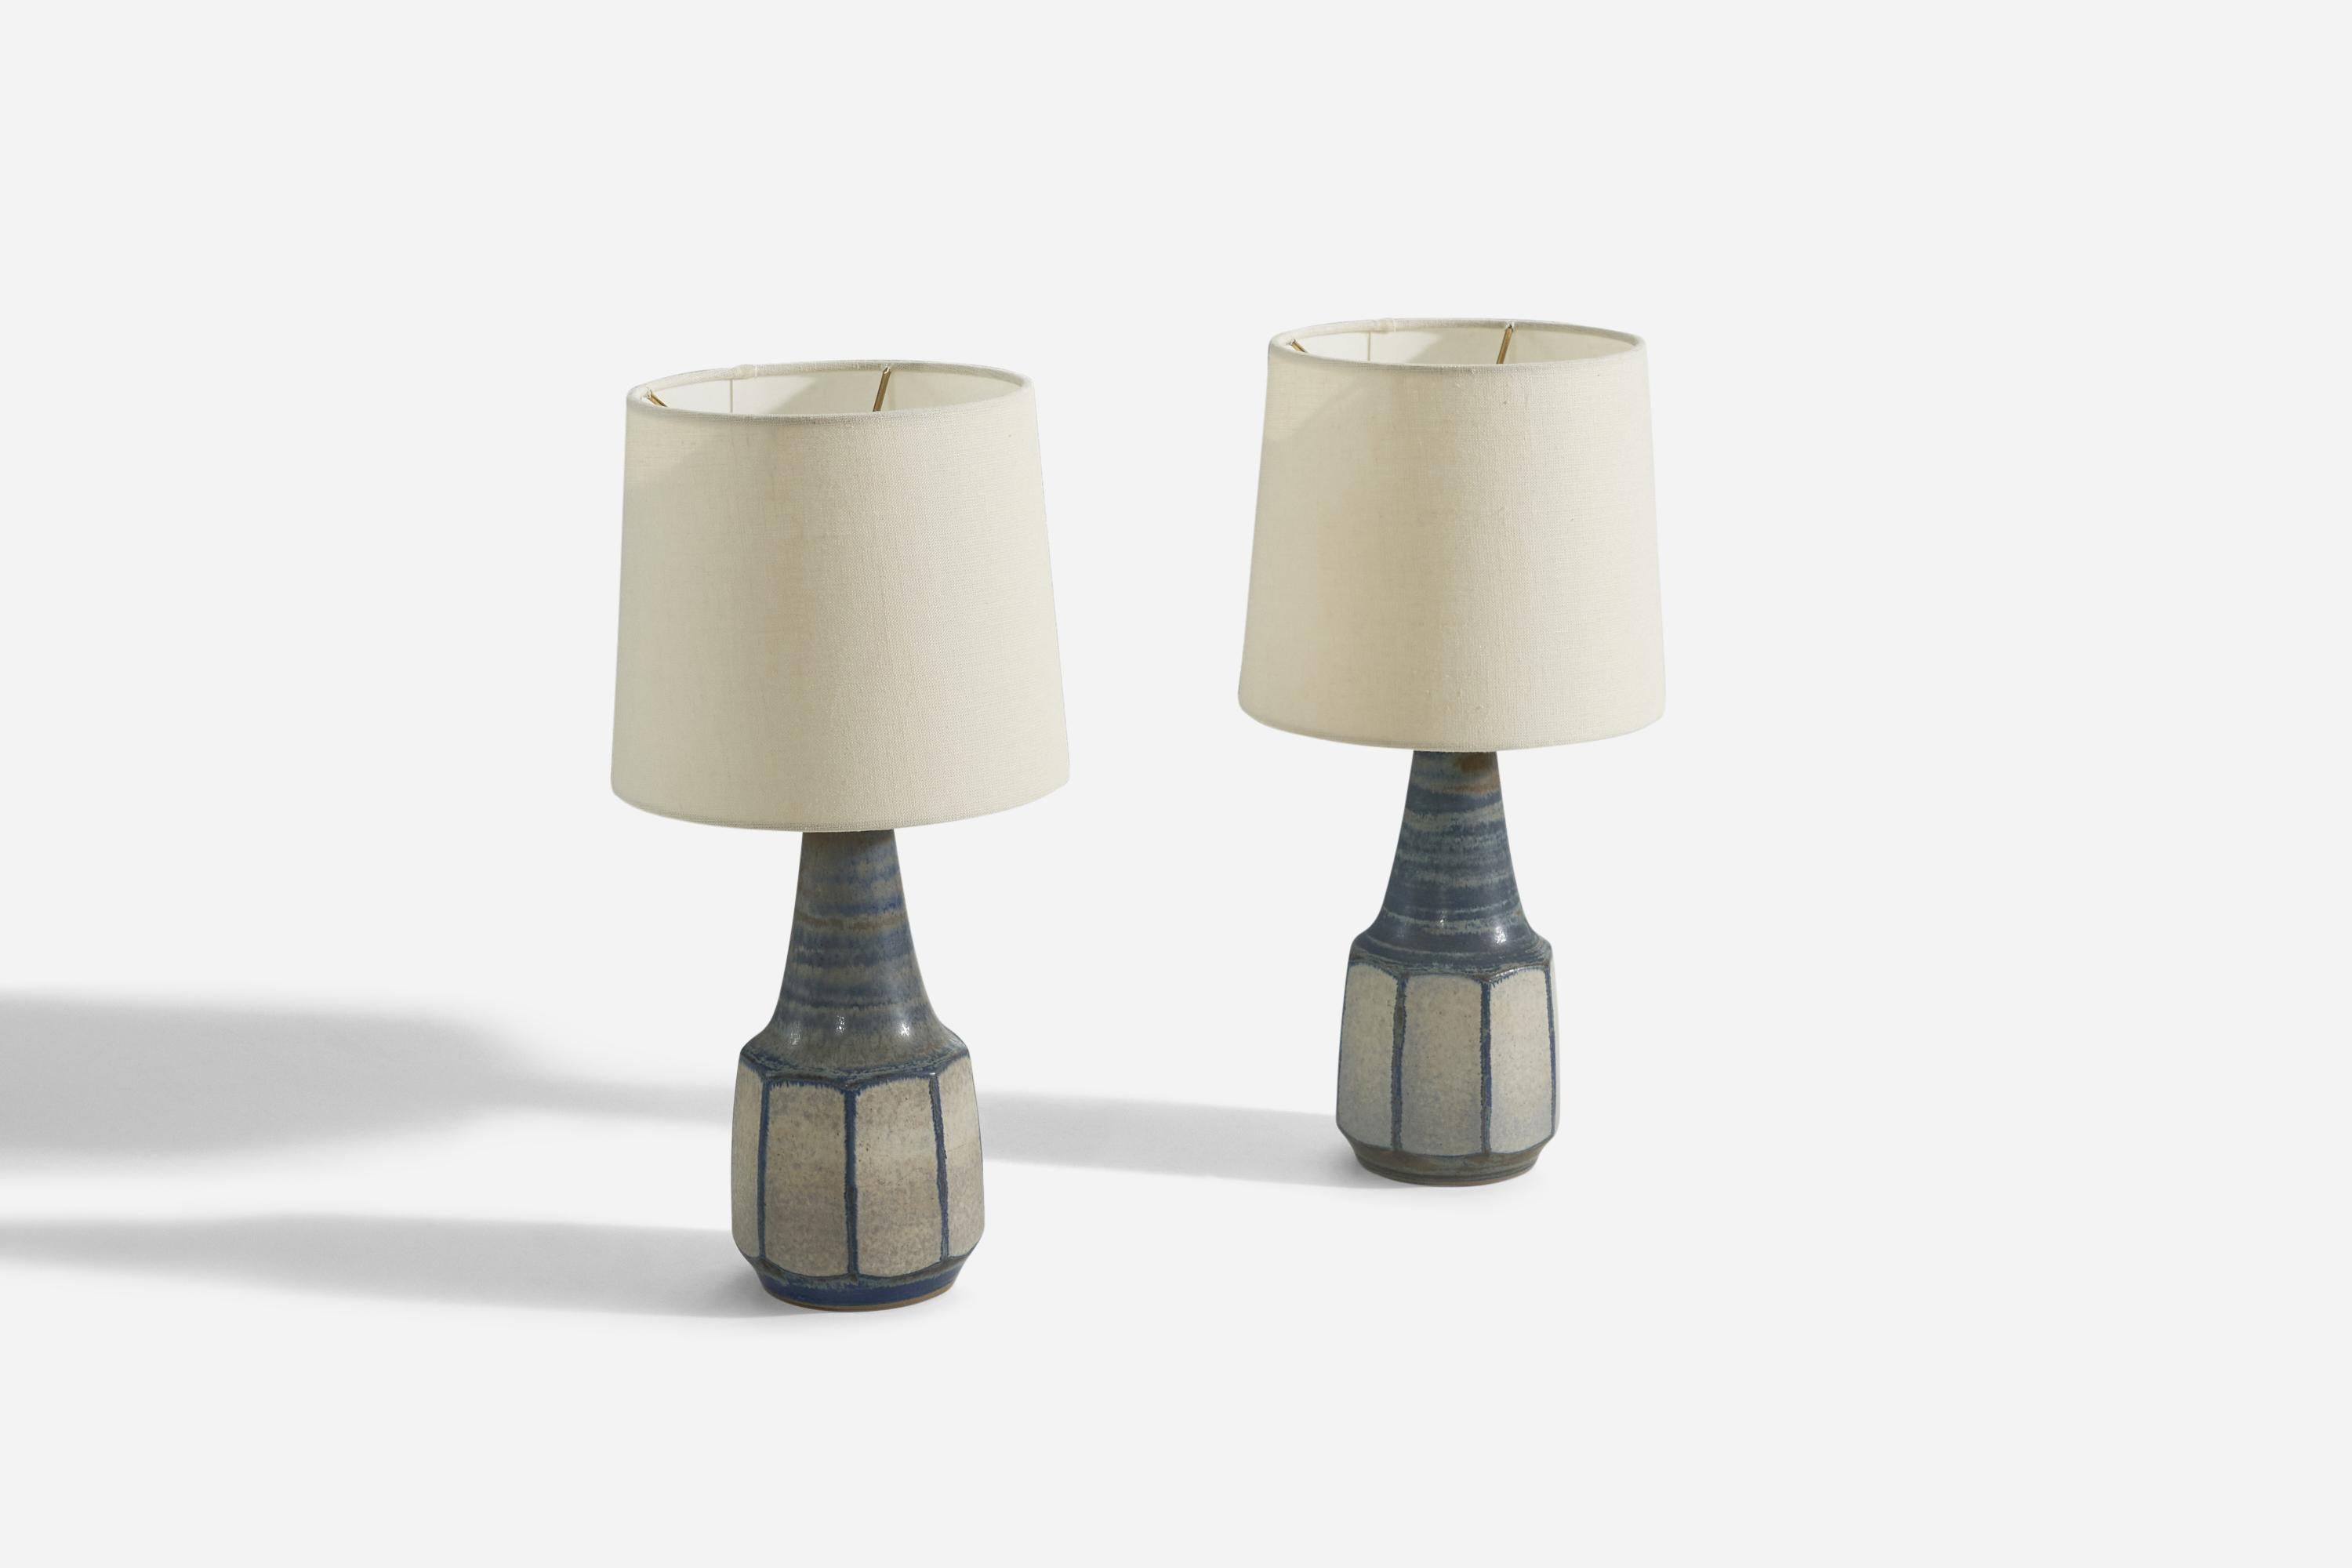 A pair of blue and grey, glazed stoneware table lamps designed by Marianne Starck and produced by Michael Andersen Keramik, Denmark, 1960s. 

Sold without lampshade. 
Dimensions of Lamp (inches) : (12.75 x 4.5 x 4.5) (H x W x D)
Dimensions of